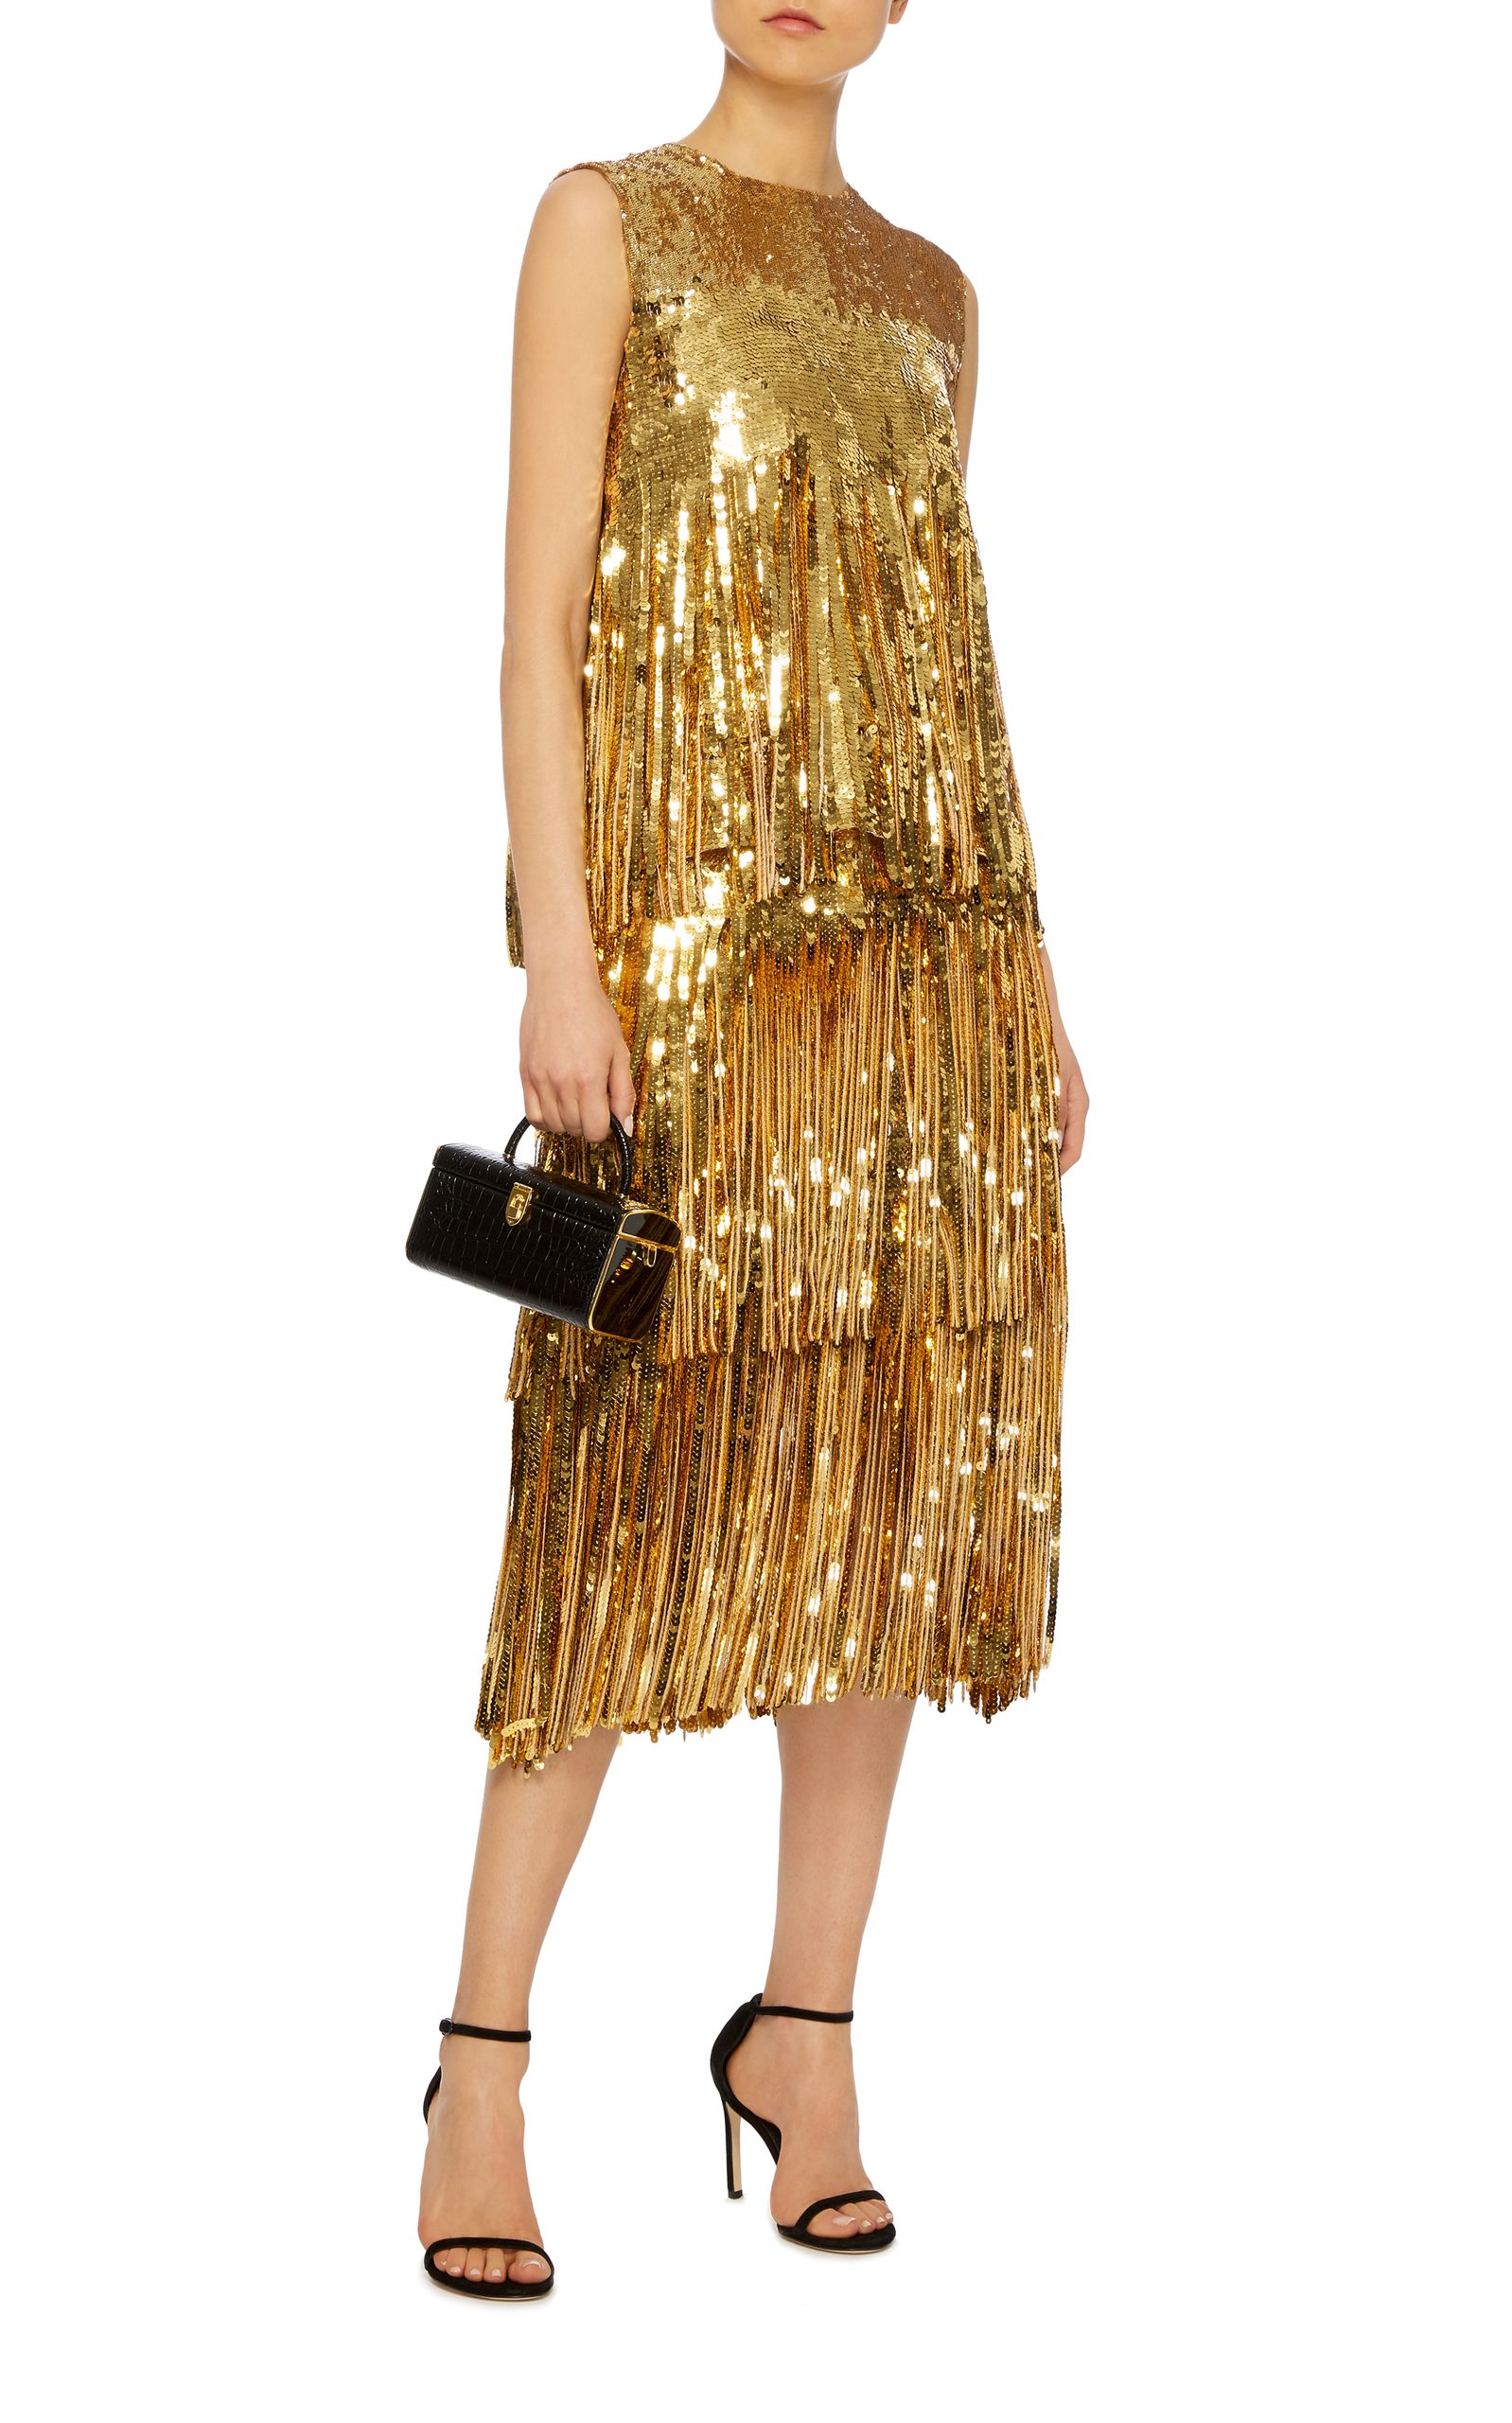 New Years Eve Sequin and Gold Dresses 2023 | Become Chic